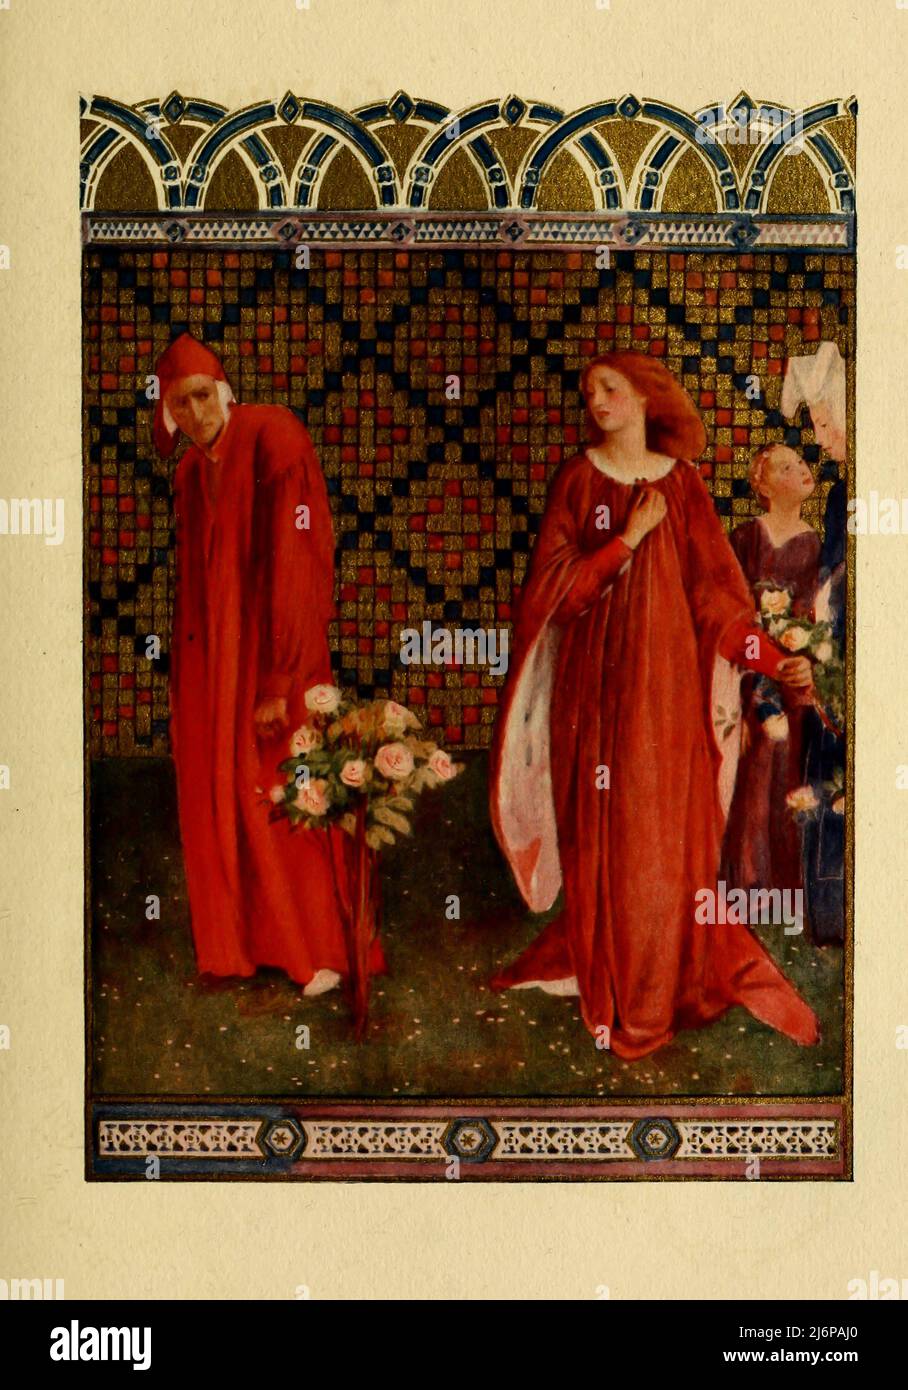 The new life of Dante Alighieri; by Dante Alighieri, 1265-1321; translated into English by Dante Gabriel Rossetti, 1828-1882; and illustrated by Evelyn Paul, Publication date 1915 Publisher Coventry George G. Harrap. La Vita Nuova (The New Life) or Vita Nova (Latin title) is a text by Dante Alighieri published in 1294. It is an expression of the medieval genre of courtly love in a prosimetrum style, a combination of both prose and verse. Stock Photo